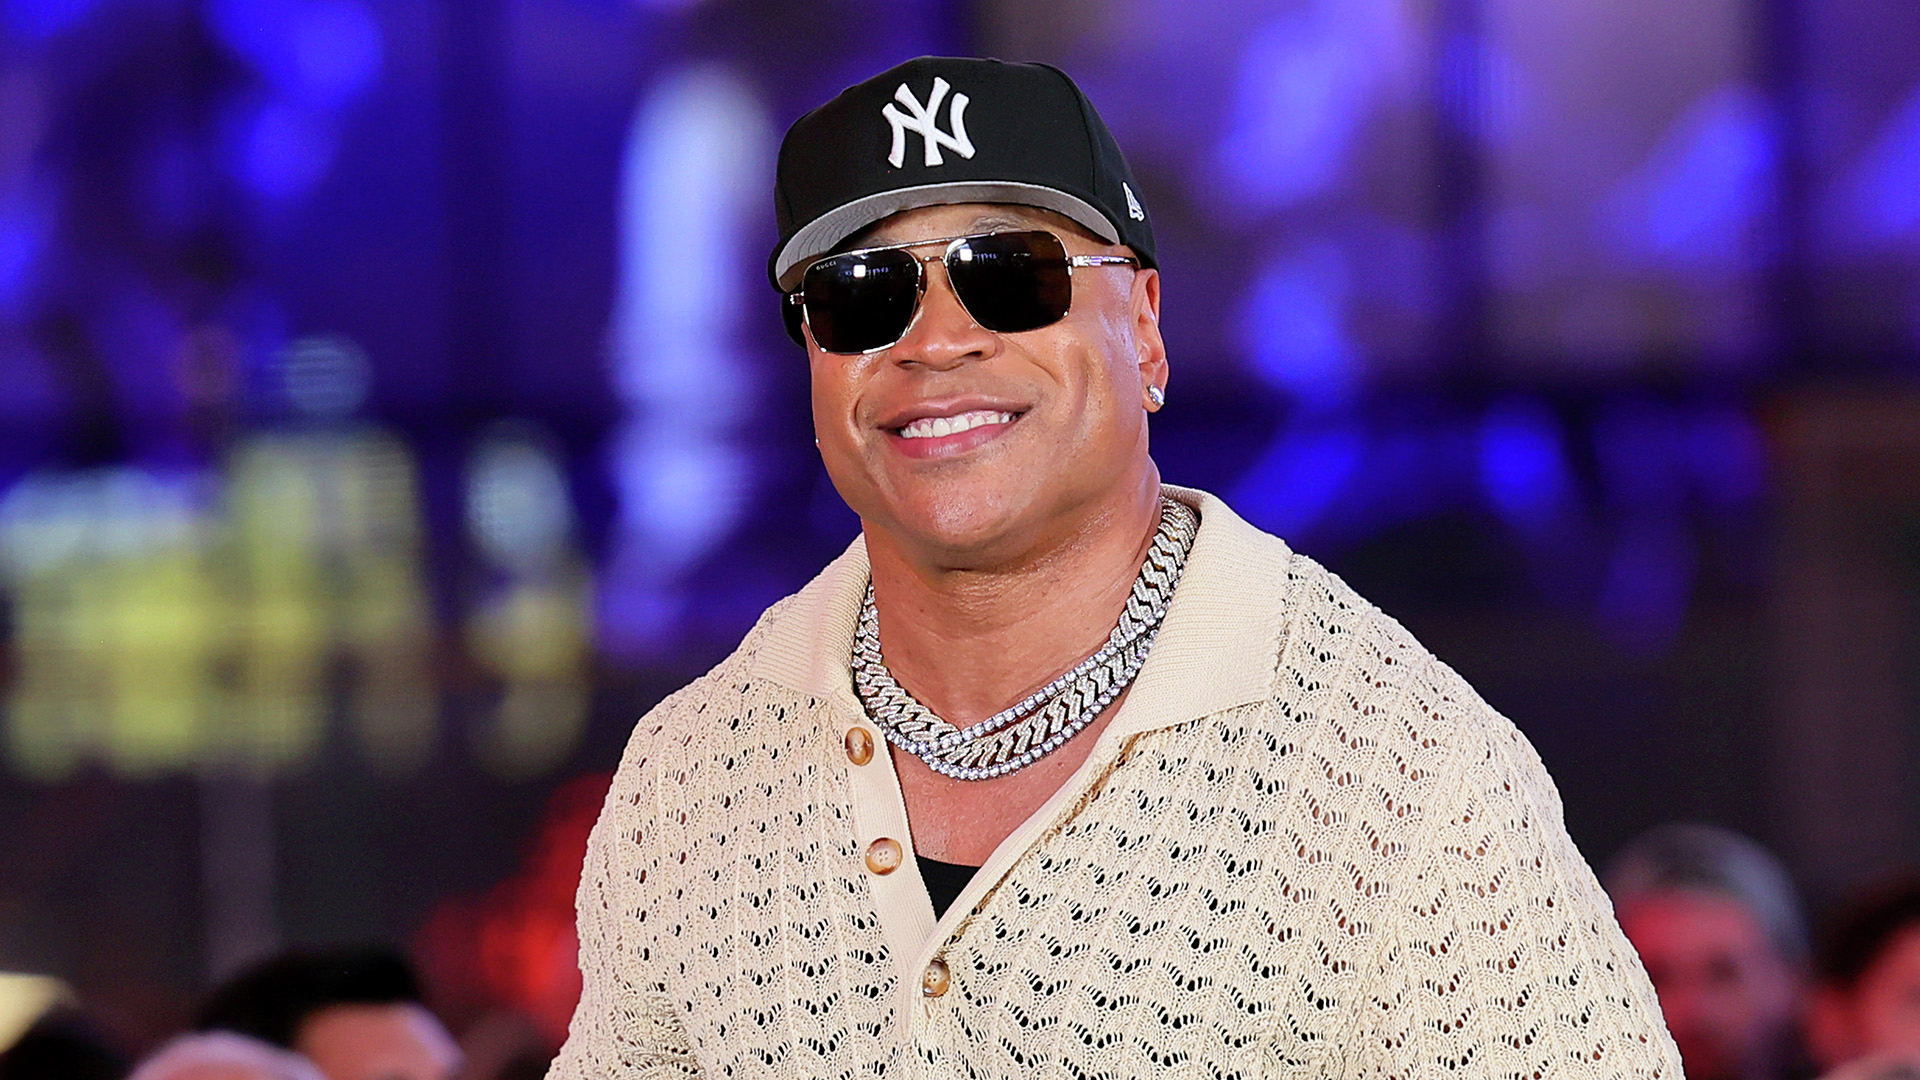 LL Cool J talks new music, staying inspired, and more with Greg Street